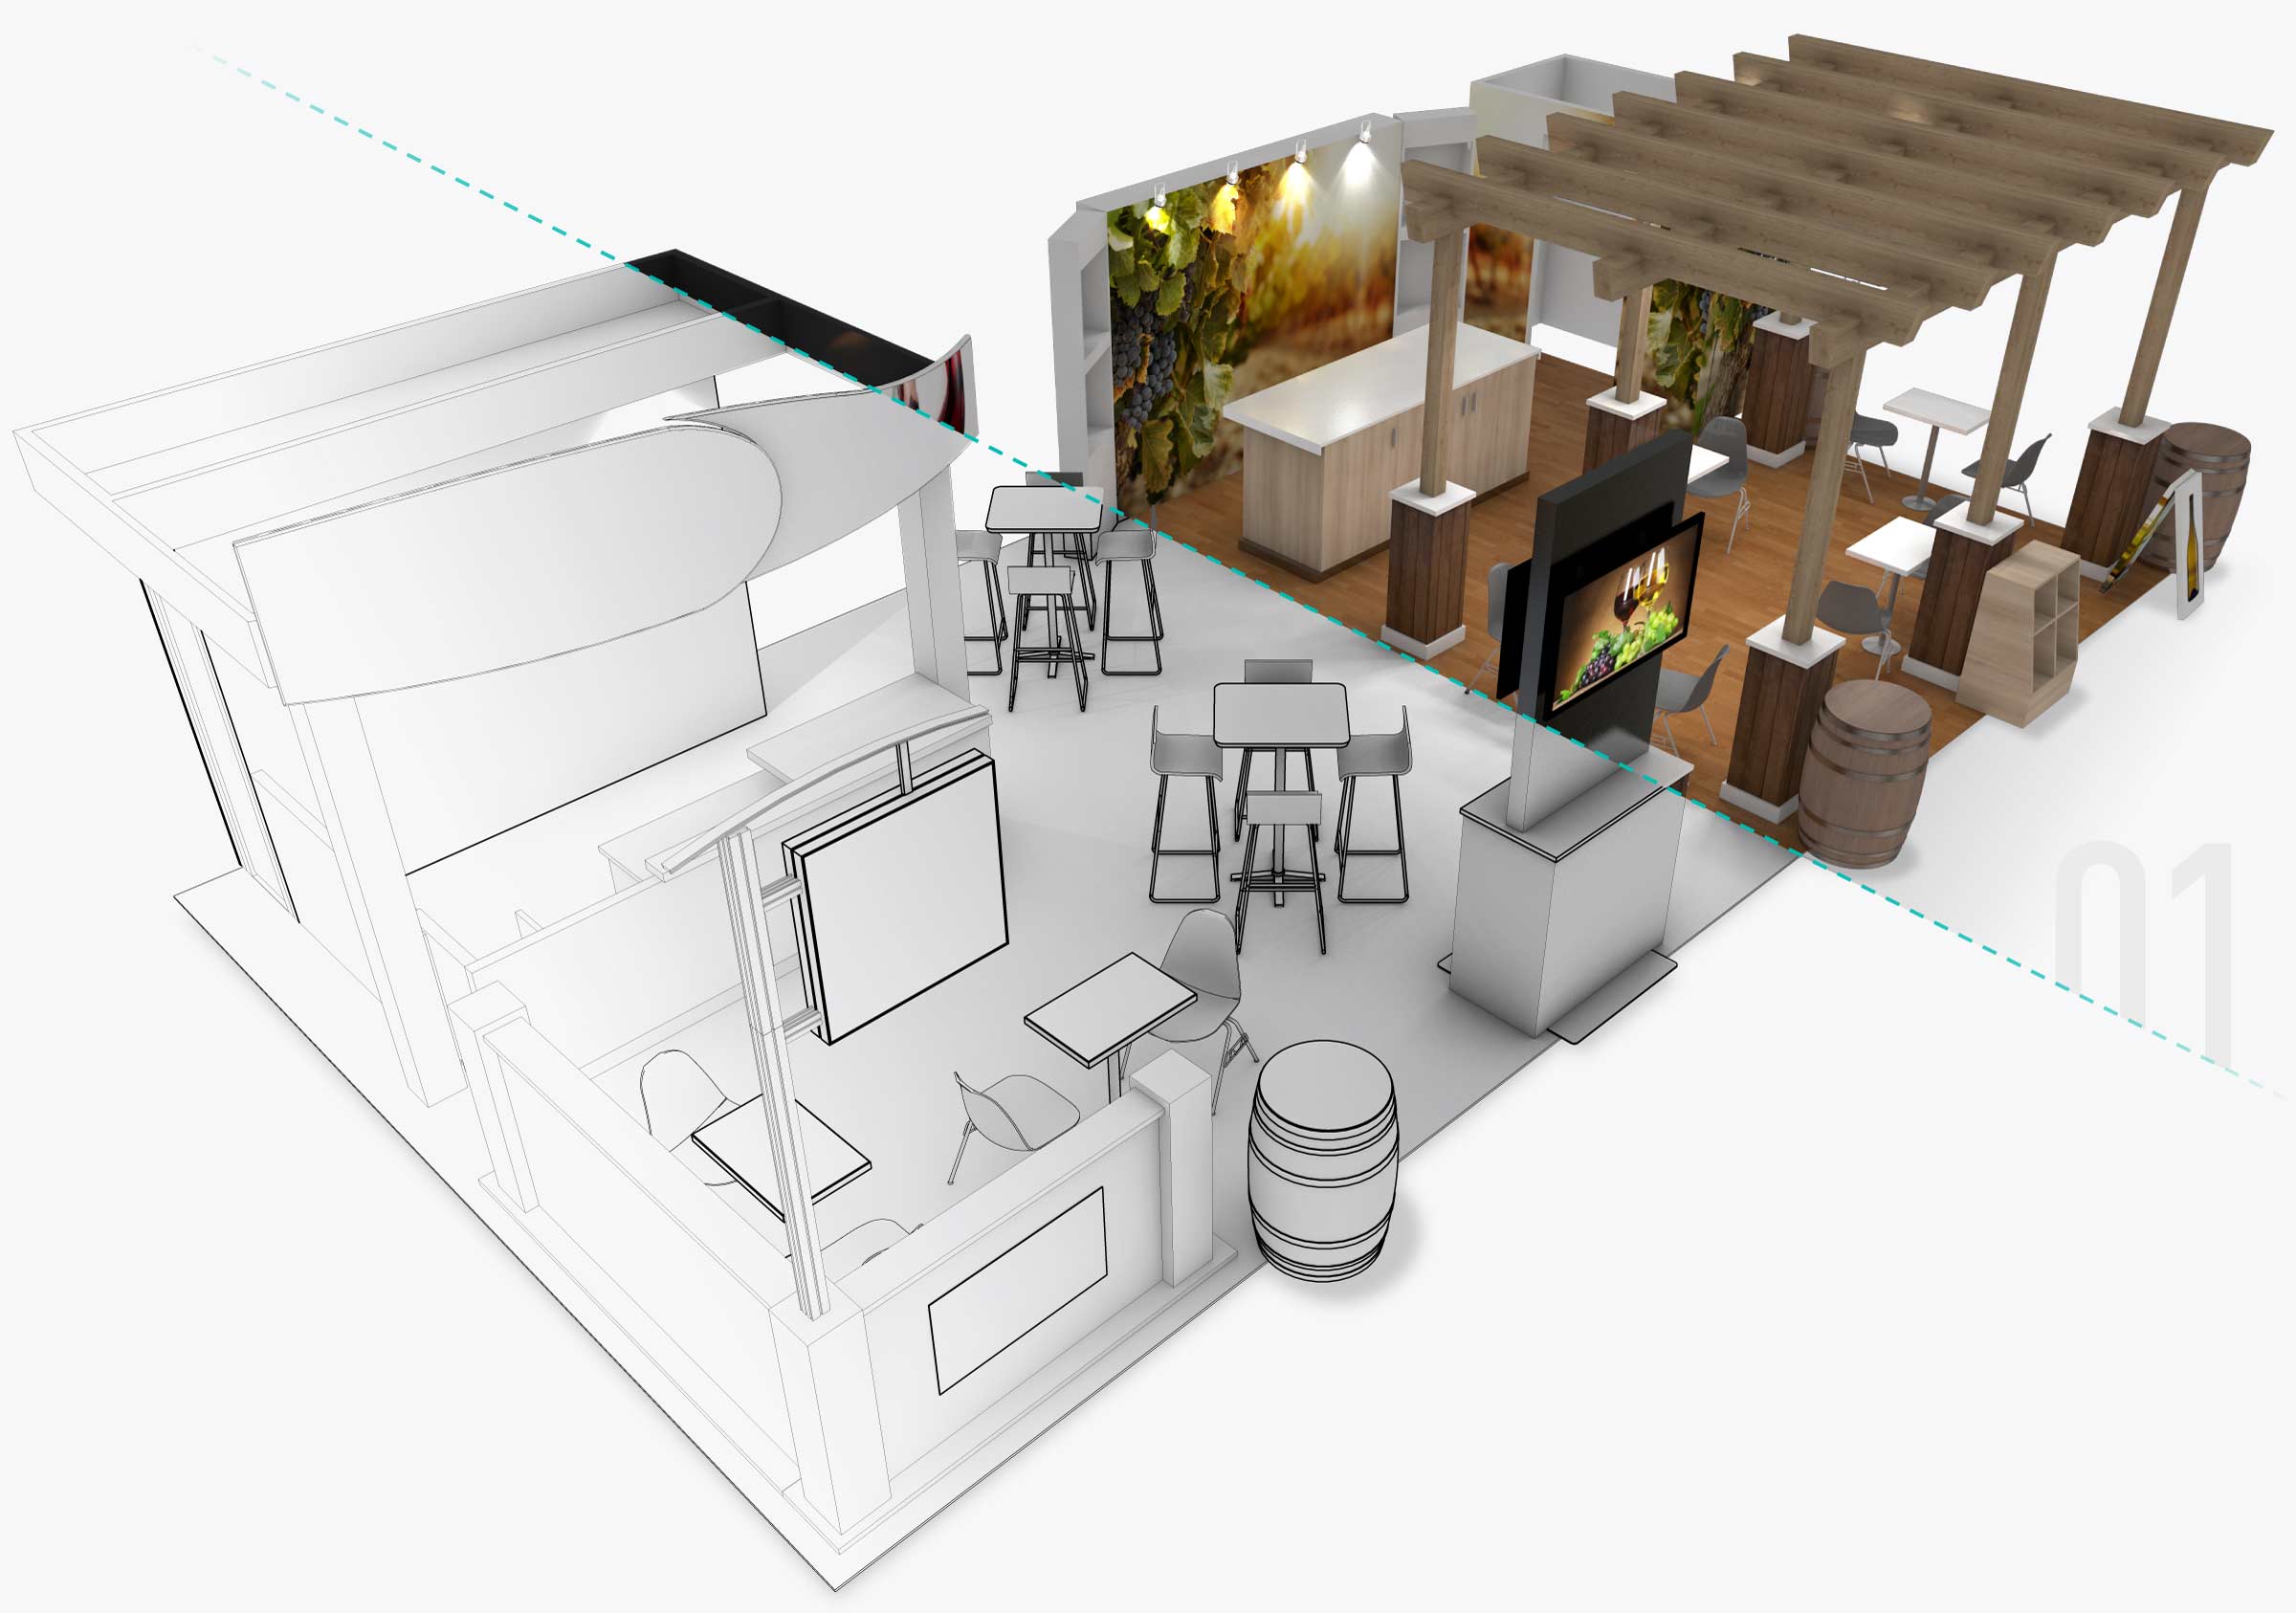 Sketch/model and rendering of trade show booth